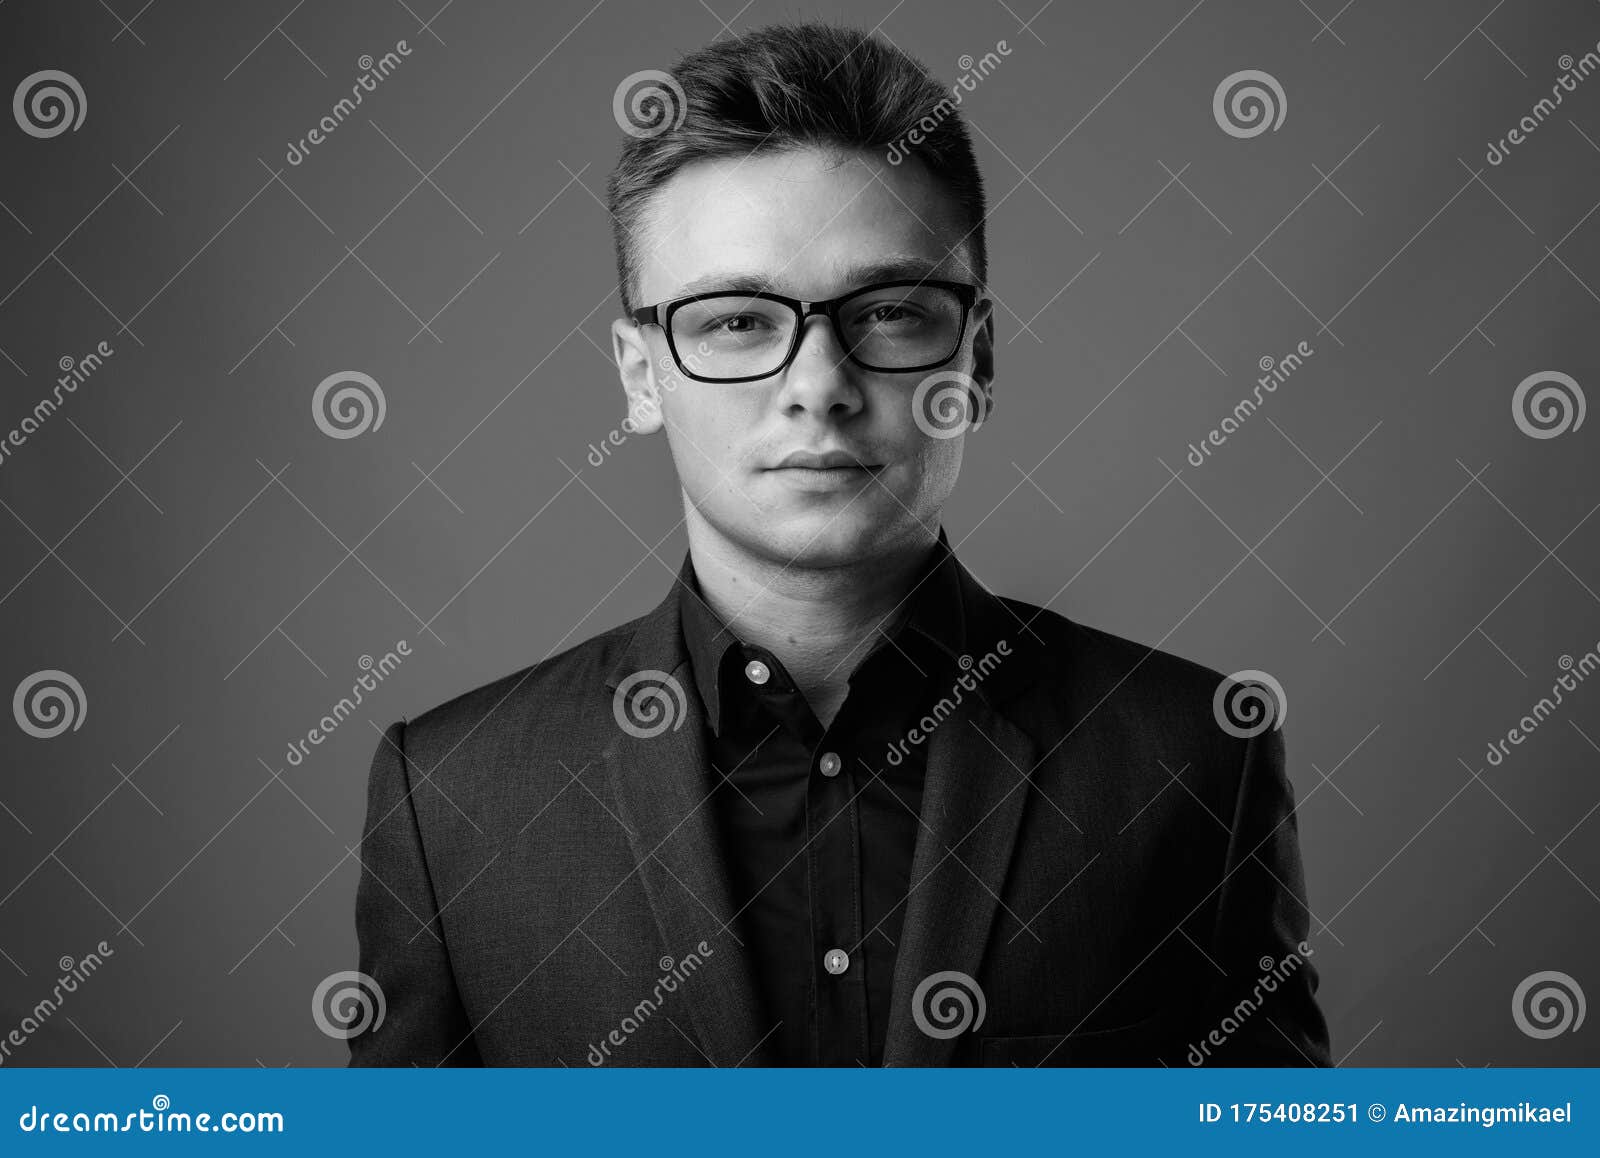 Portrait of Young Handsome Businessman in Suit Stock Image - Image of ...